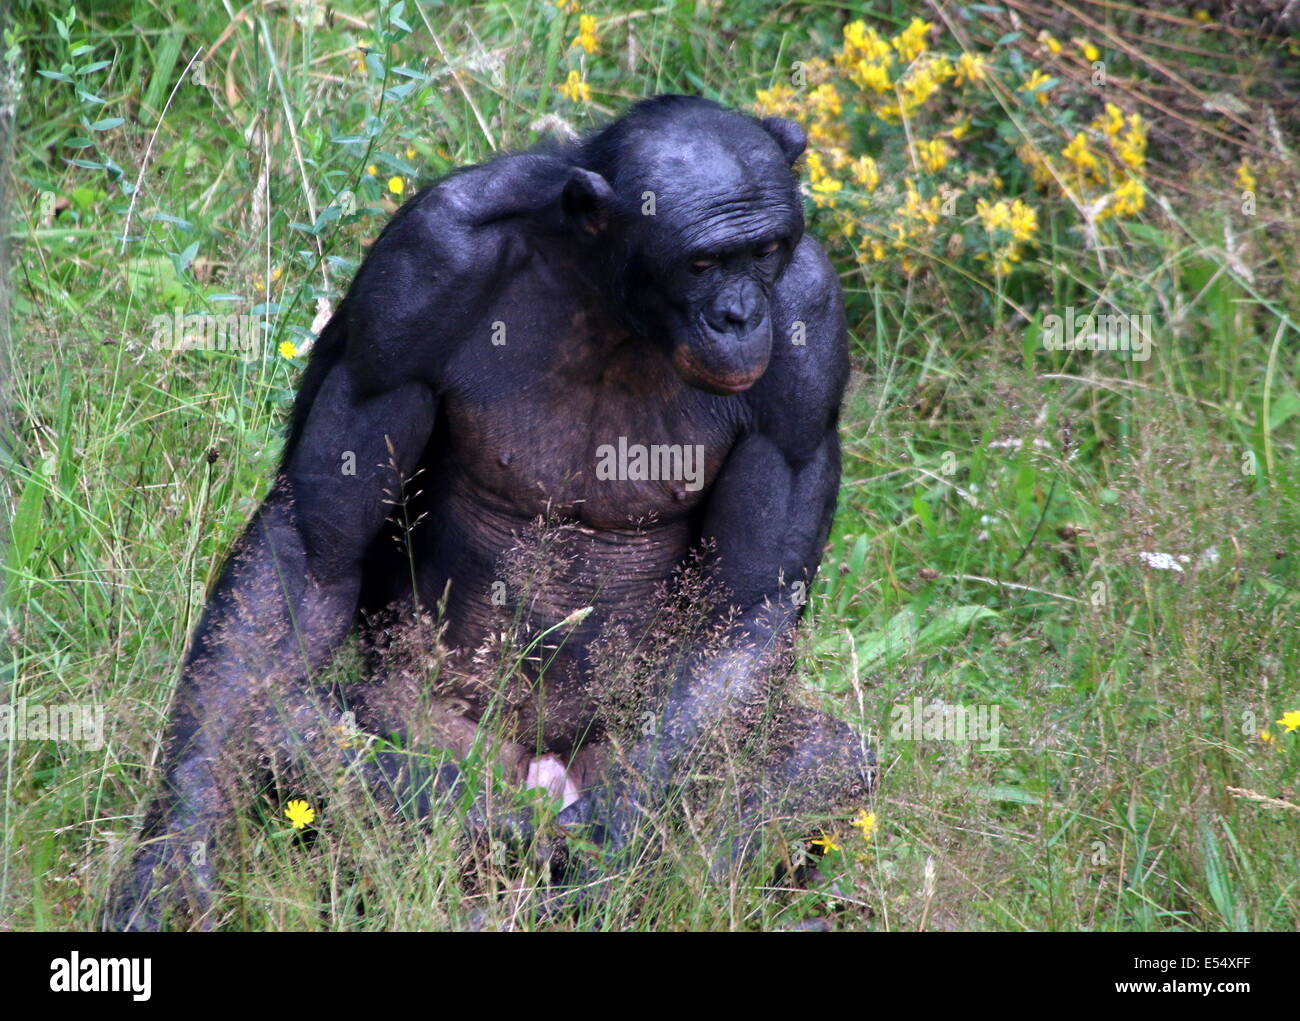 Mature male Bonobo or (formerly) Pygmy Chimpanzee (Pan Paniscus) in a natural setting Stock Photo